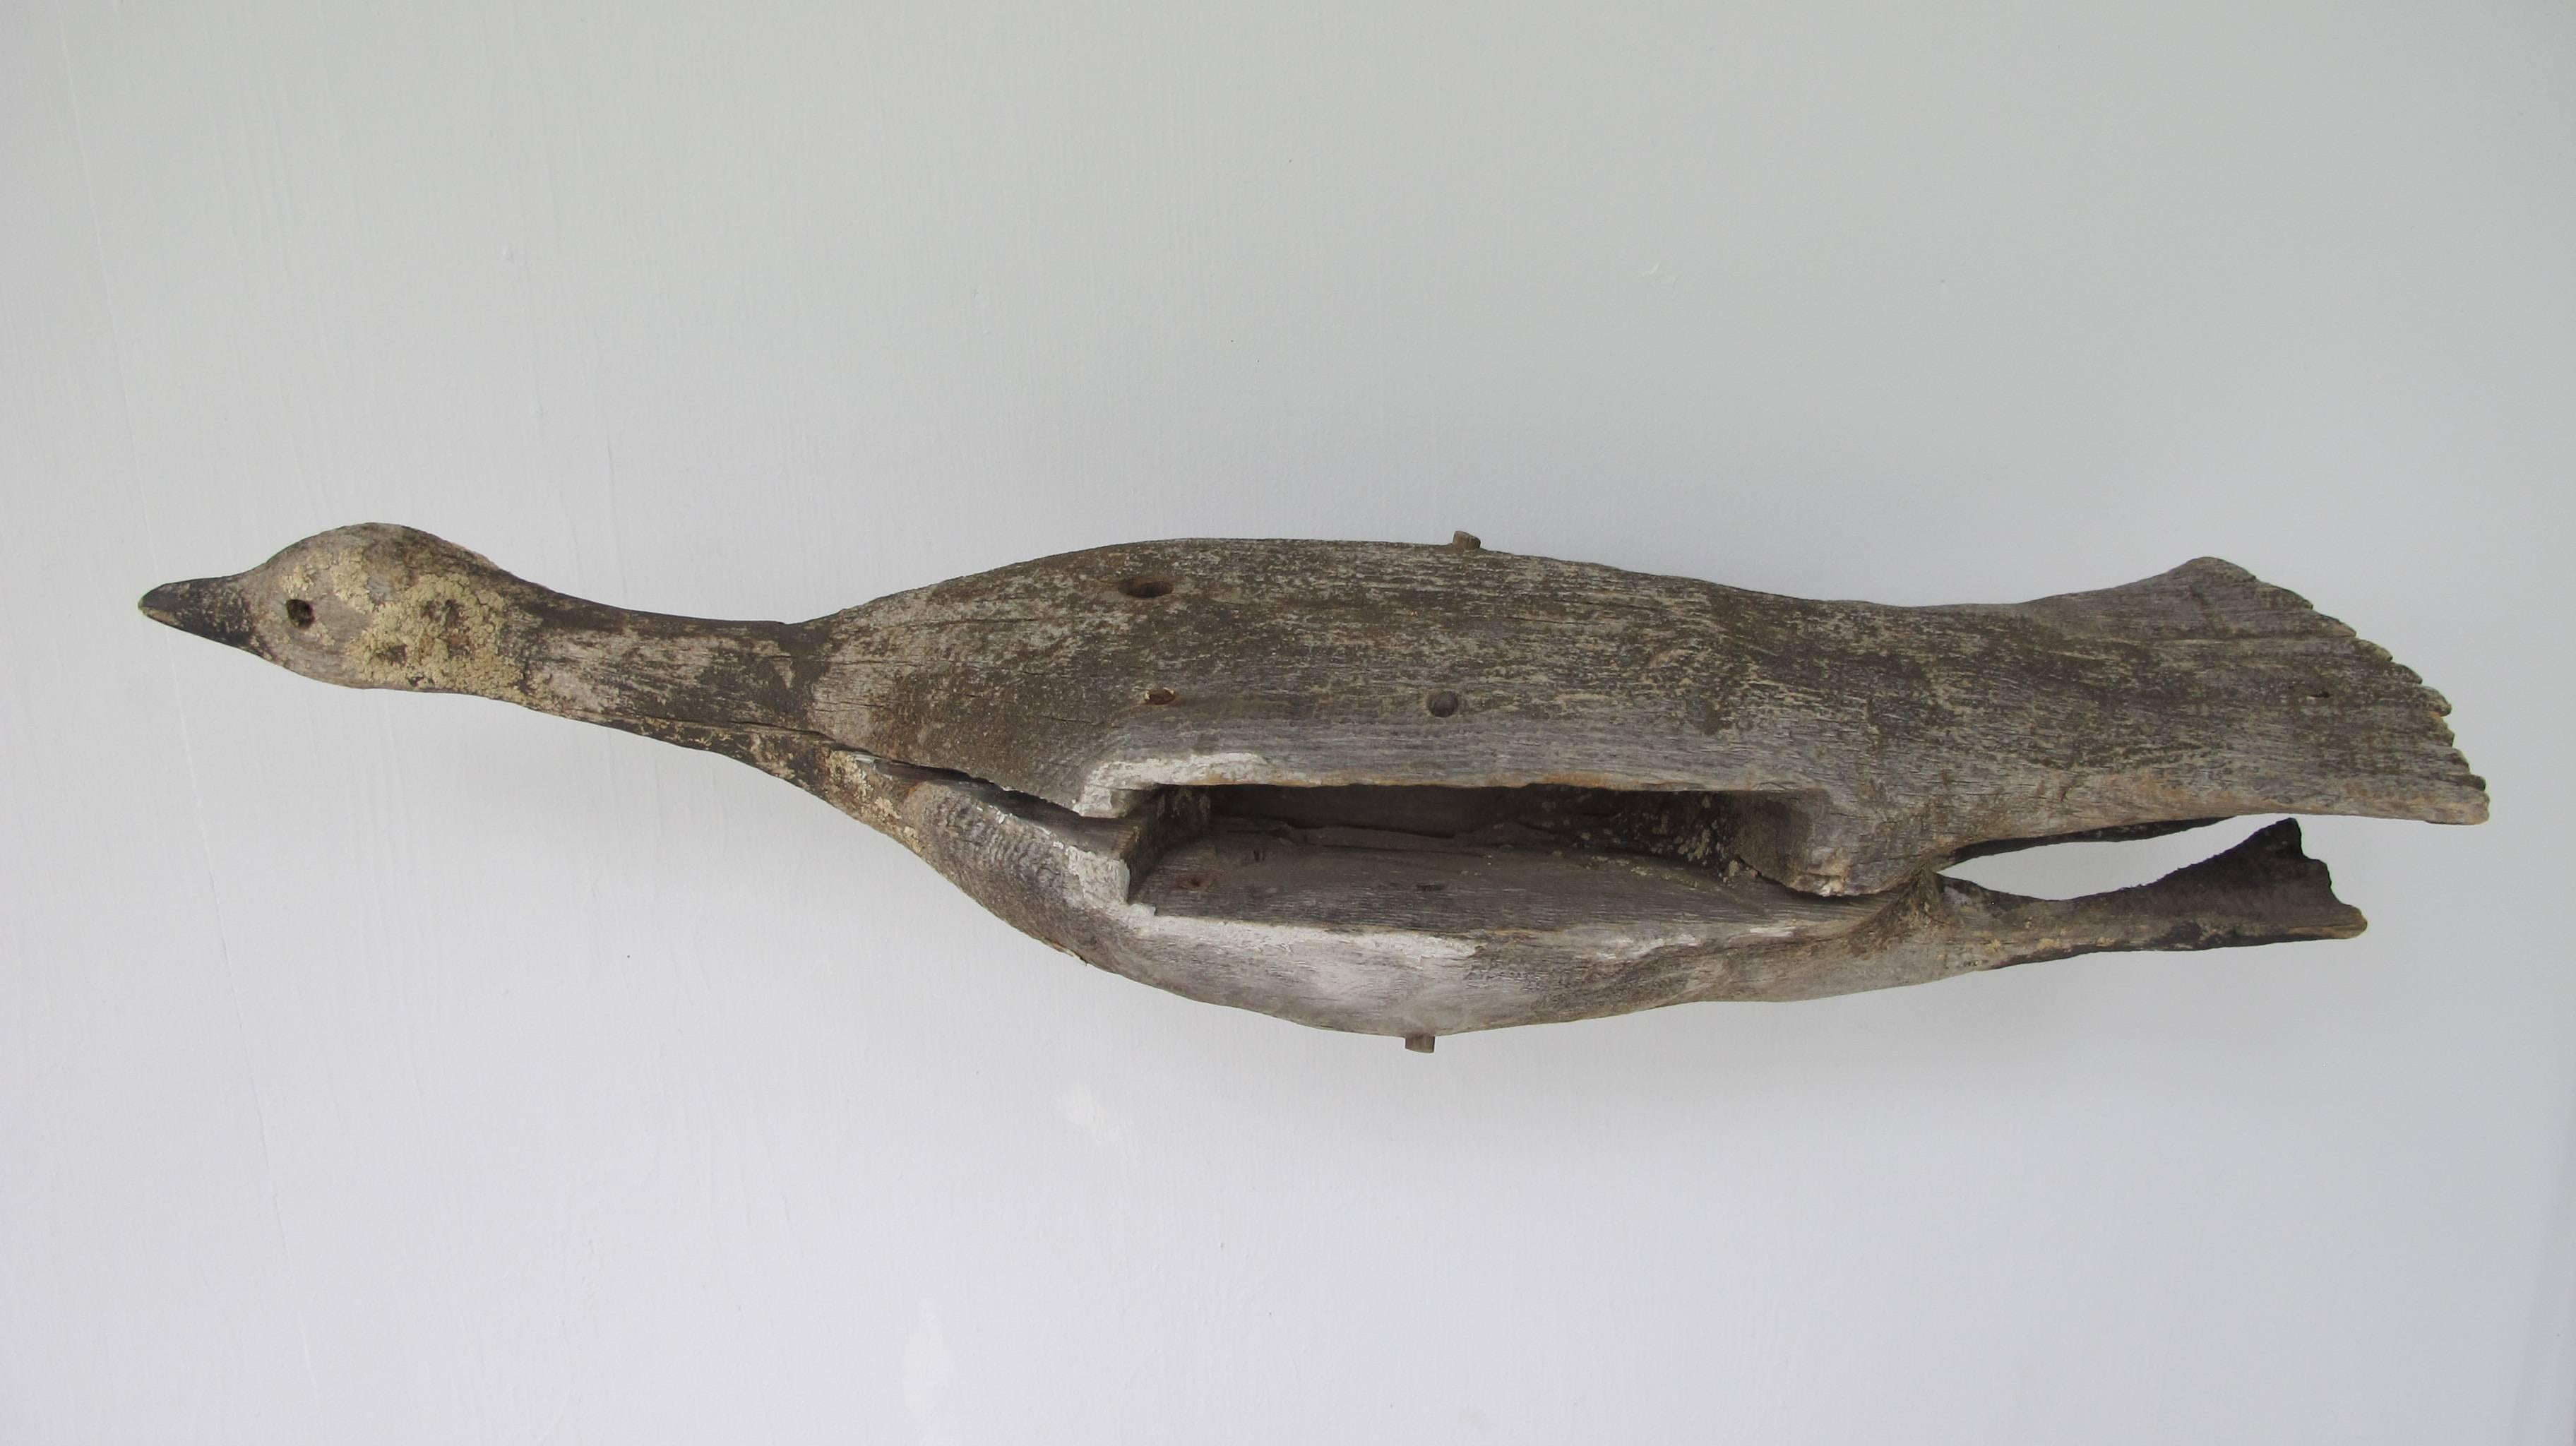 Flying Canada goose carving with extended neck and legs pulled up in the back.
There is a hole in the bottom where it was attached and used as a weathervane or trade sign. It had wings that would have slotted into the sides and were pegged. Without